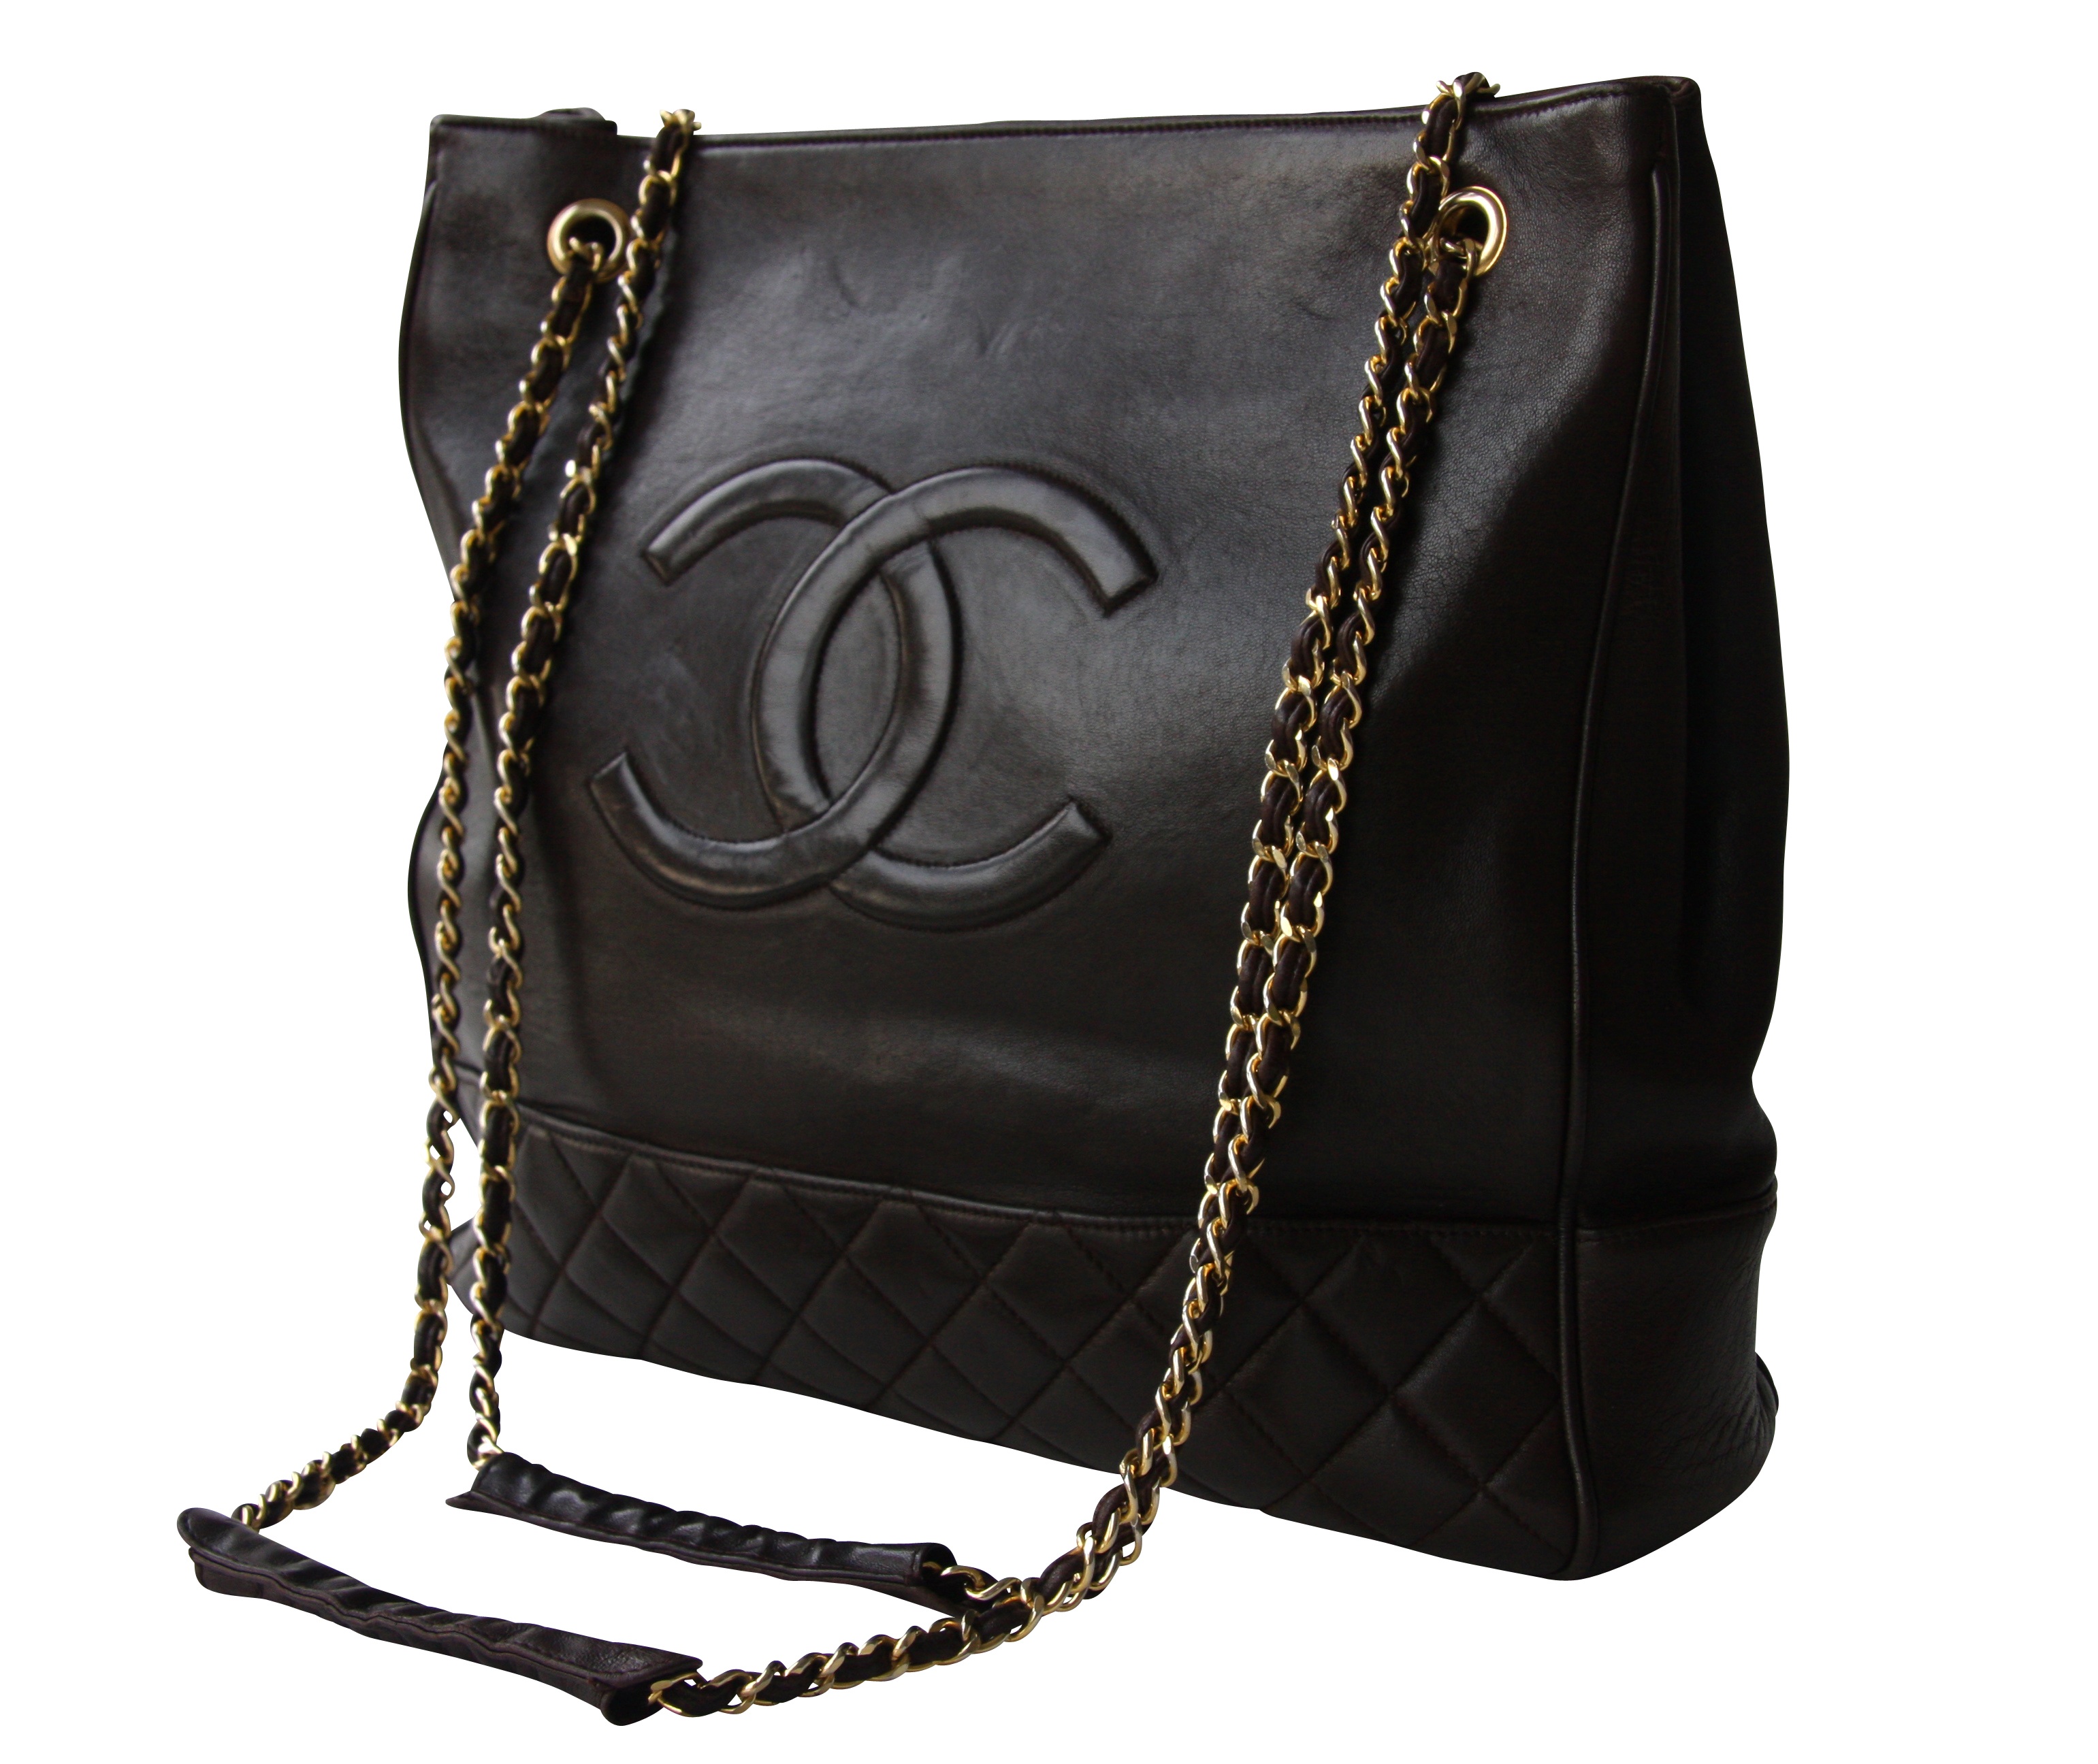 ... stunning vintage chanel bags available in nina polli vintage